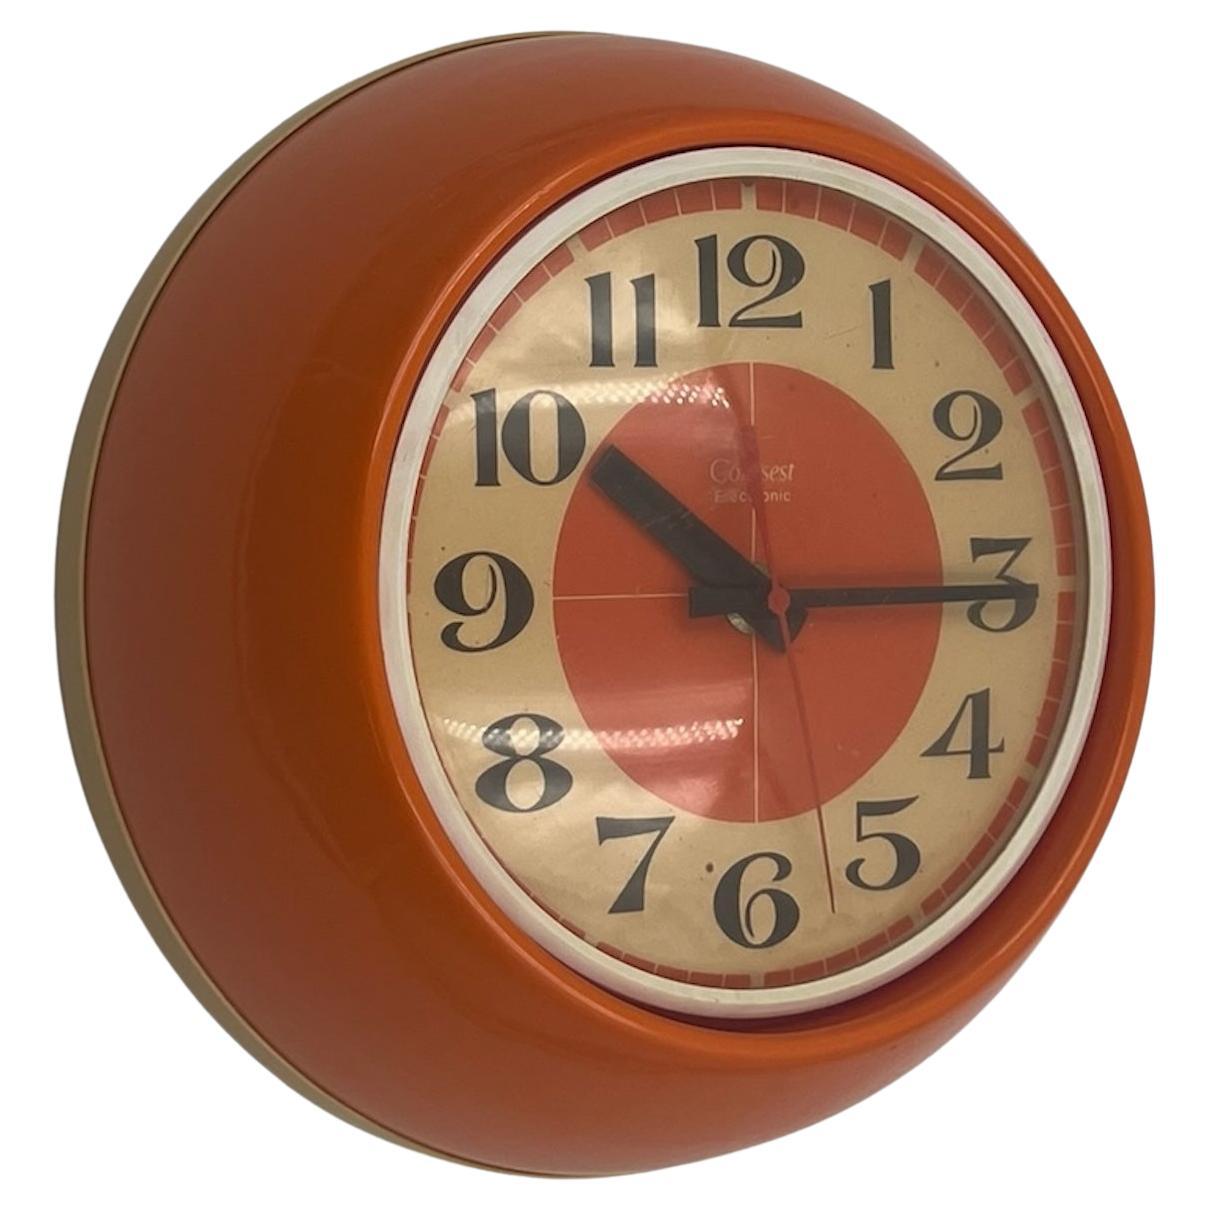 1970s Space Age Design Clock by Comsest - Rare Orange Decor Made in Italy For Sale